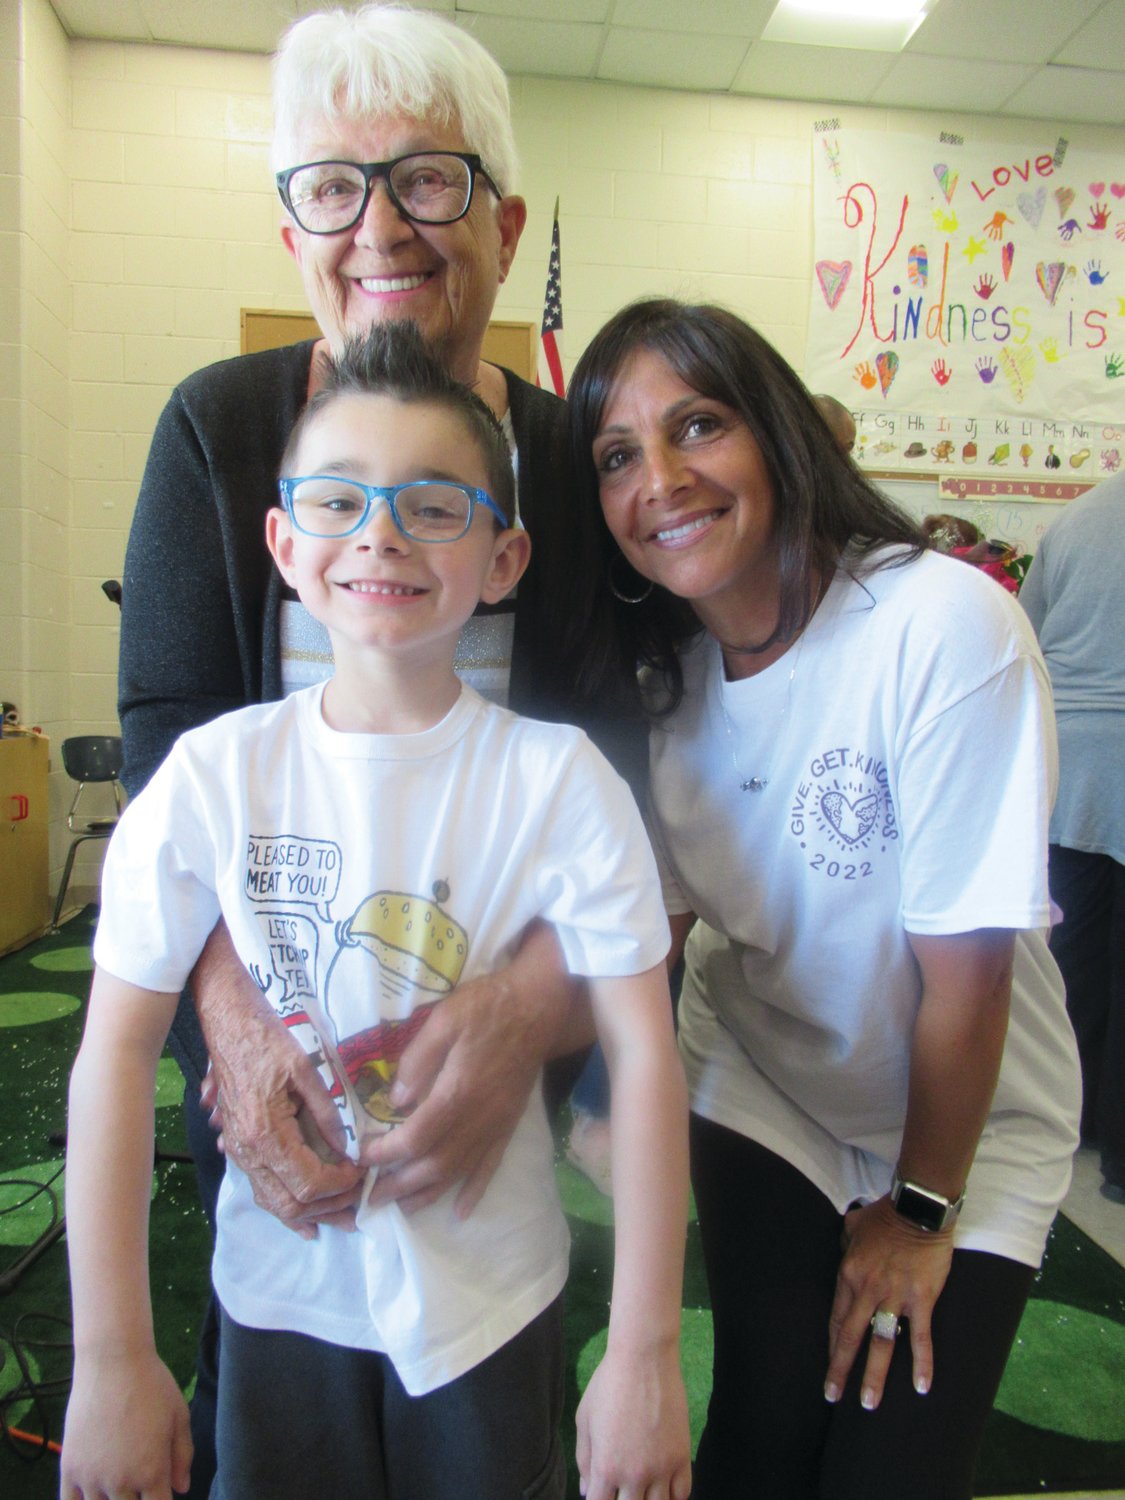 GRAM’S GUY: Lorie DeVito, former president of the once highly-active Manton Seniors hugs her grandson Anthony Pezzillo during last week’s Kindness celebration. They were joined by teacher/organizer Linda Greco.